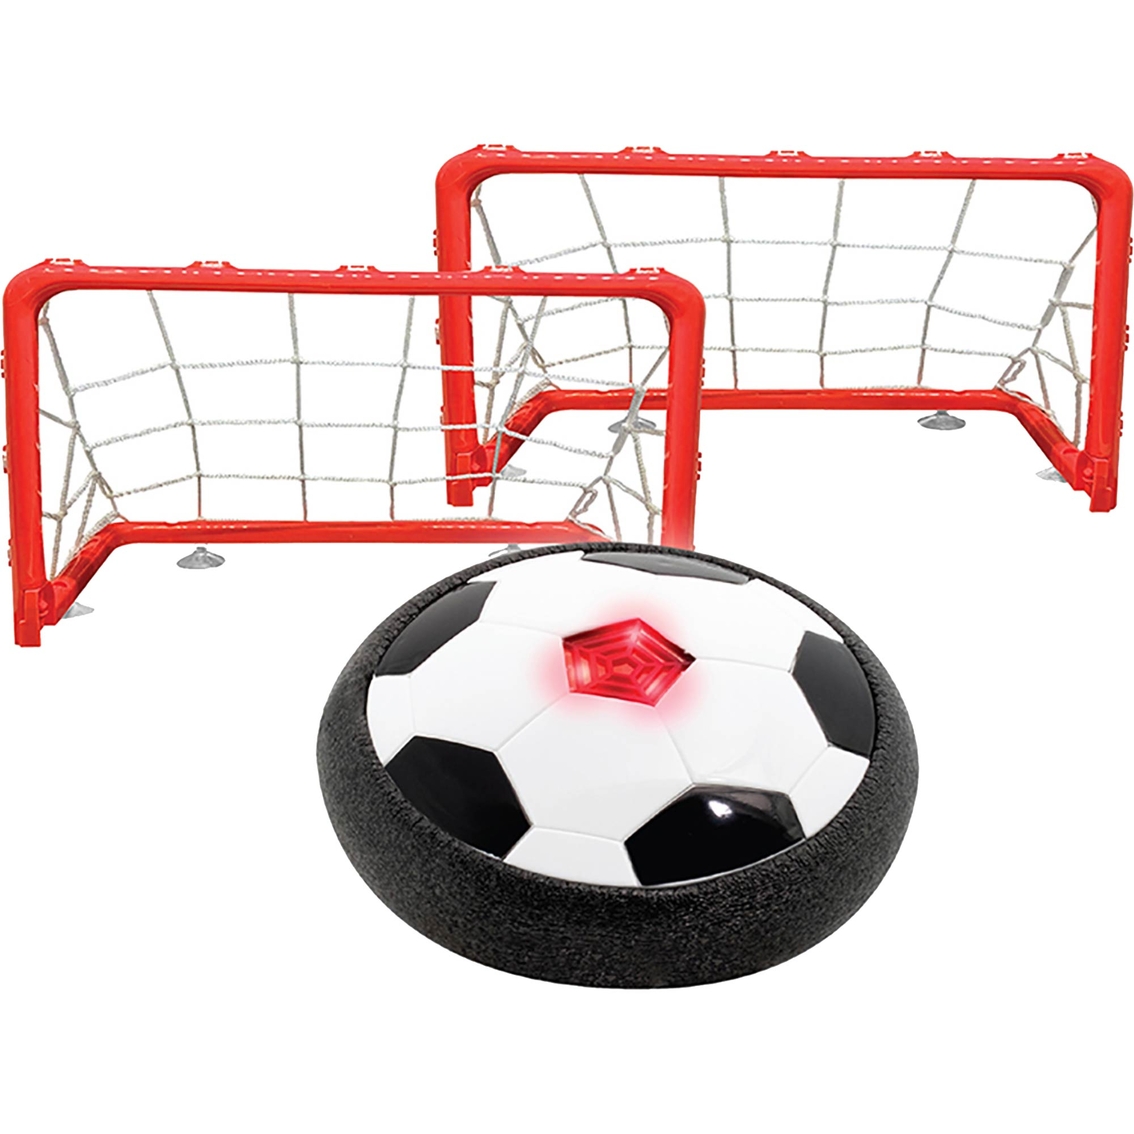 Maccabi Art Air Soccer Hover Ball Disk Game with 2 Goal Post Nets - Image 5 of 5